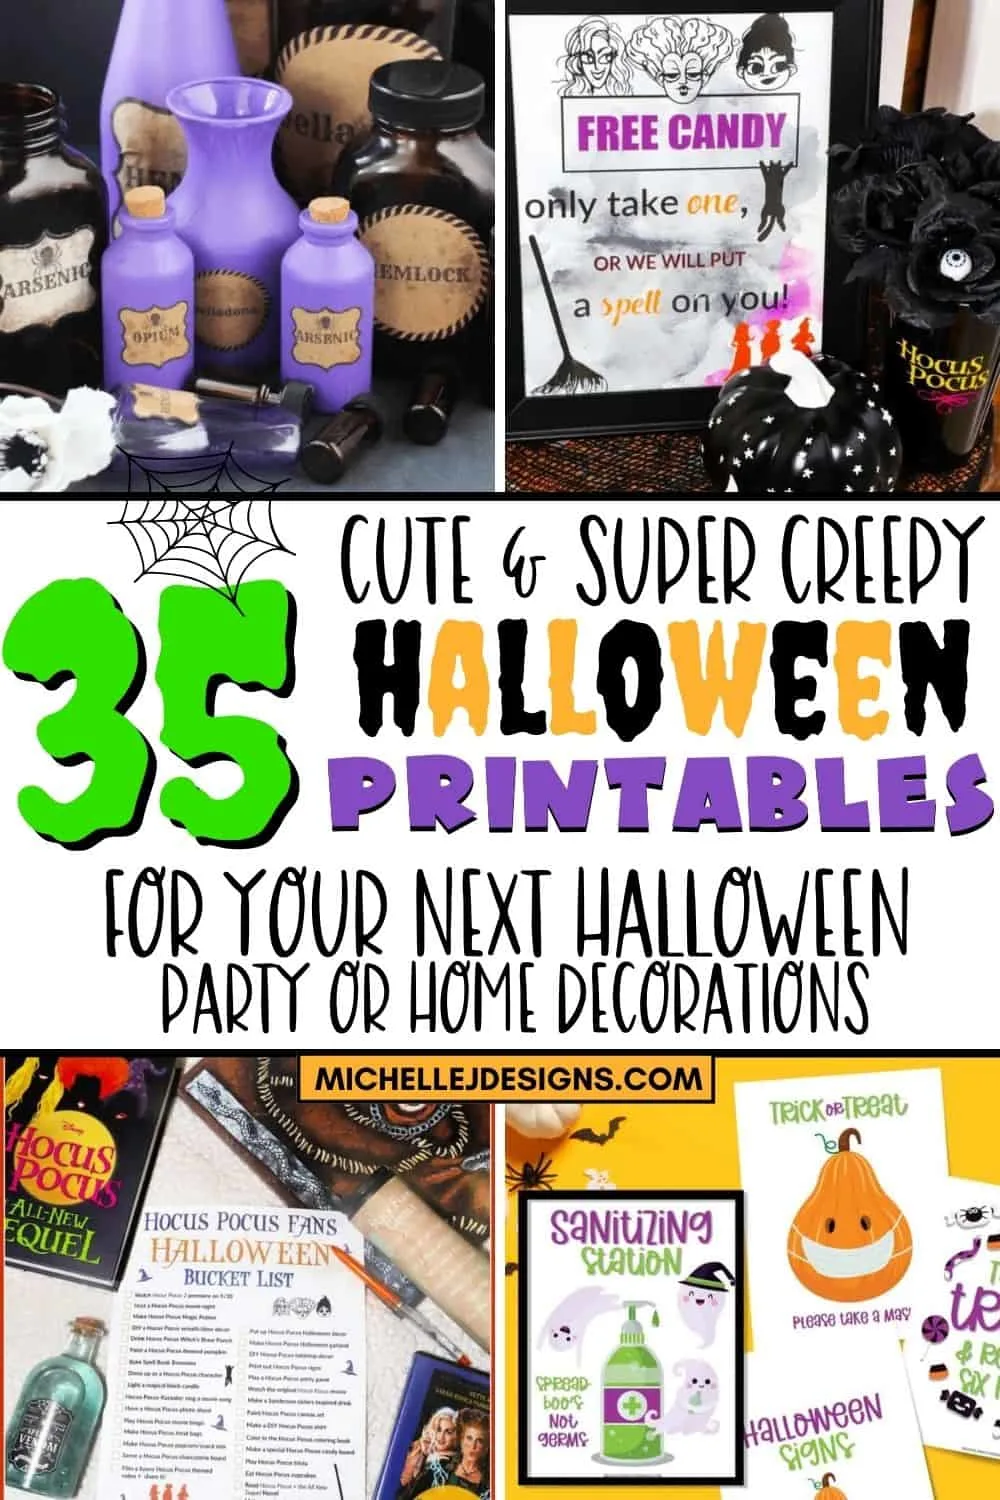 Halloween printables pin collage with text